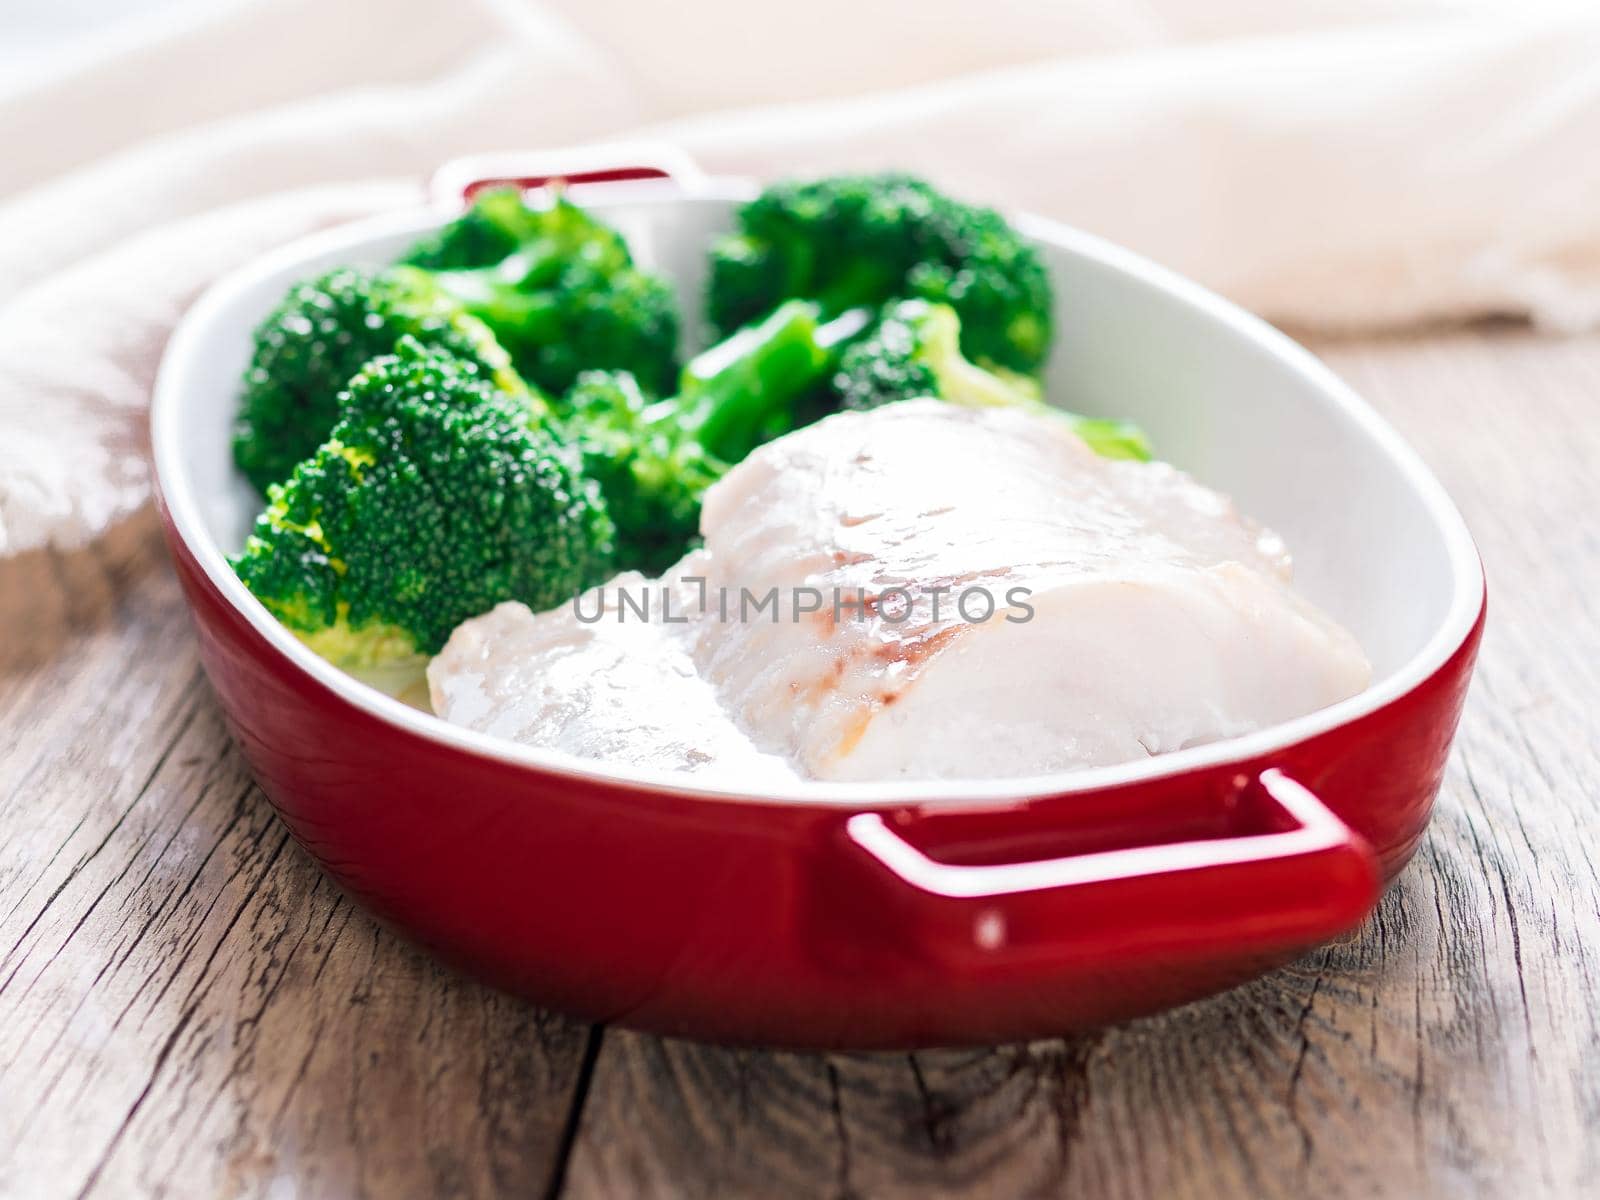 Fish cod baked in the oven with broccoli - healthy diet healthy food. Rustic wooden brown background, side view, selective focus.